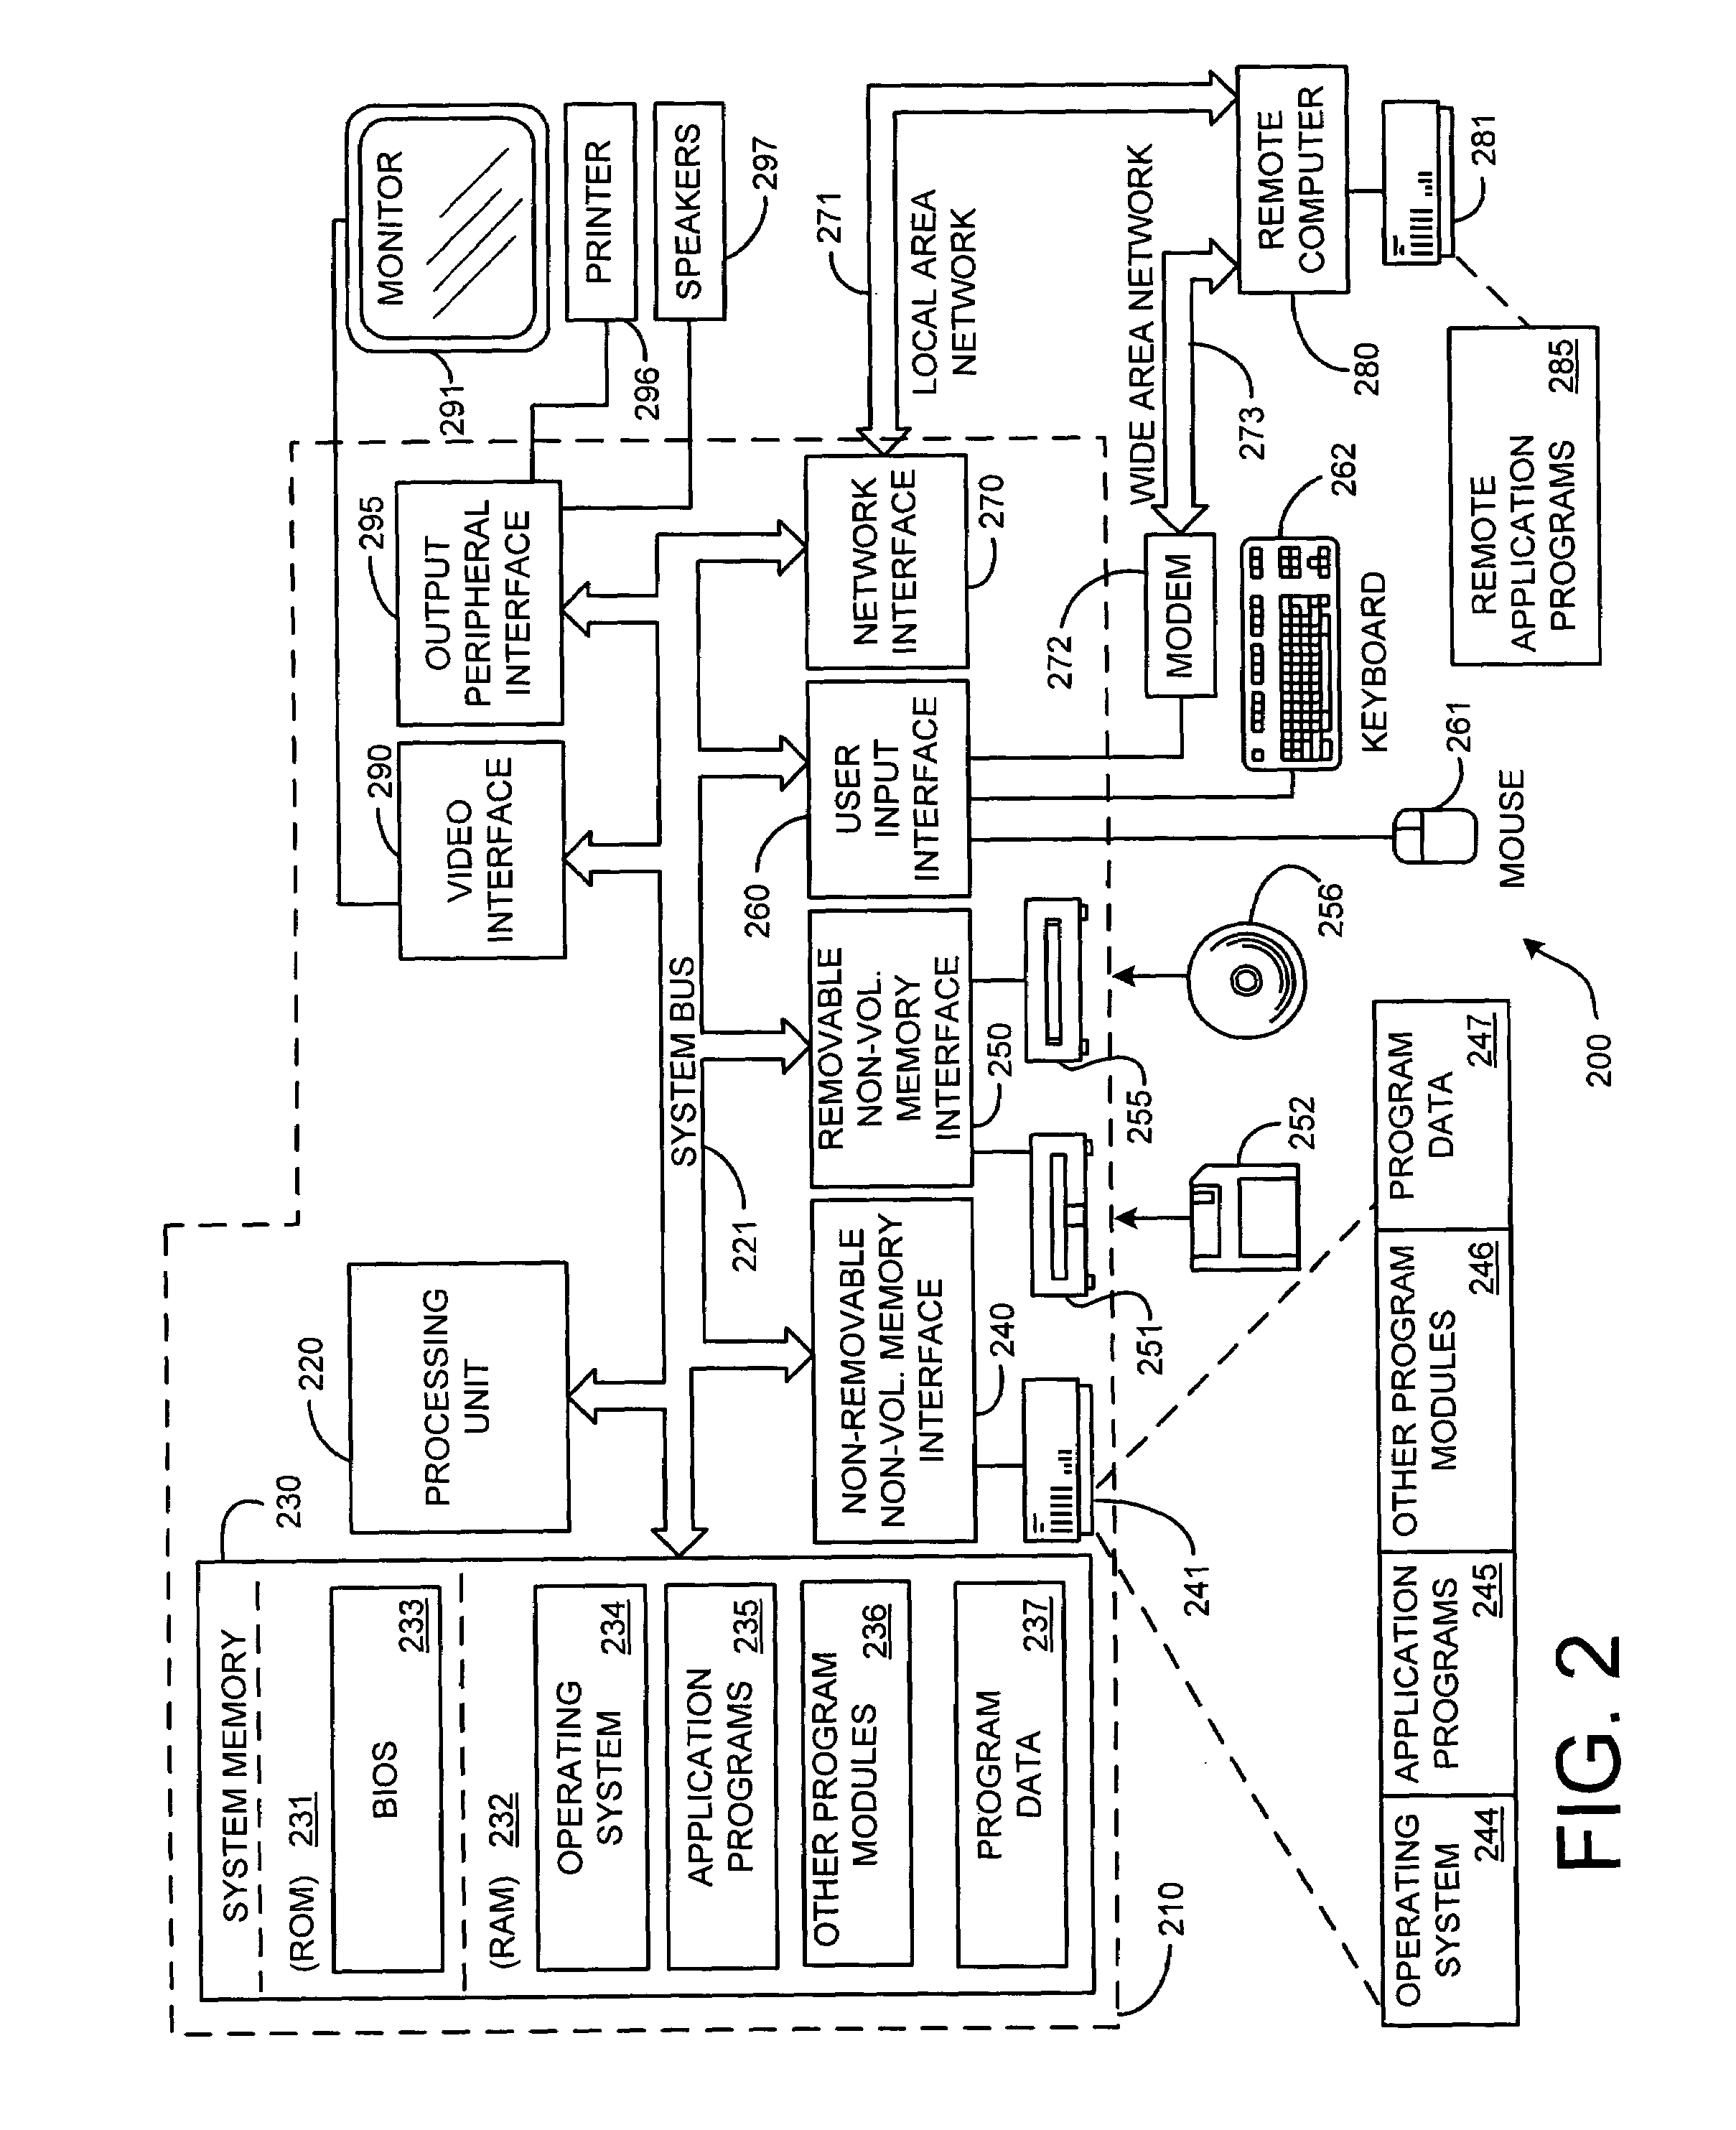 Method and system for combining multiple exposure images having scene and camera motion